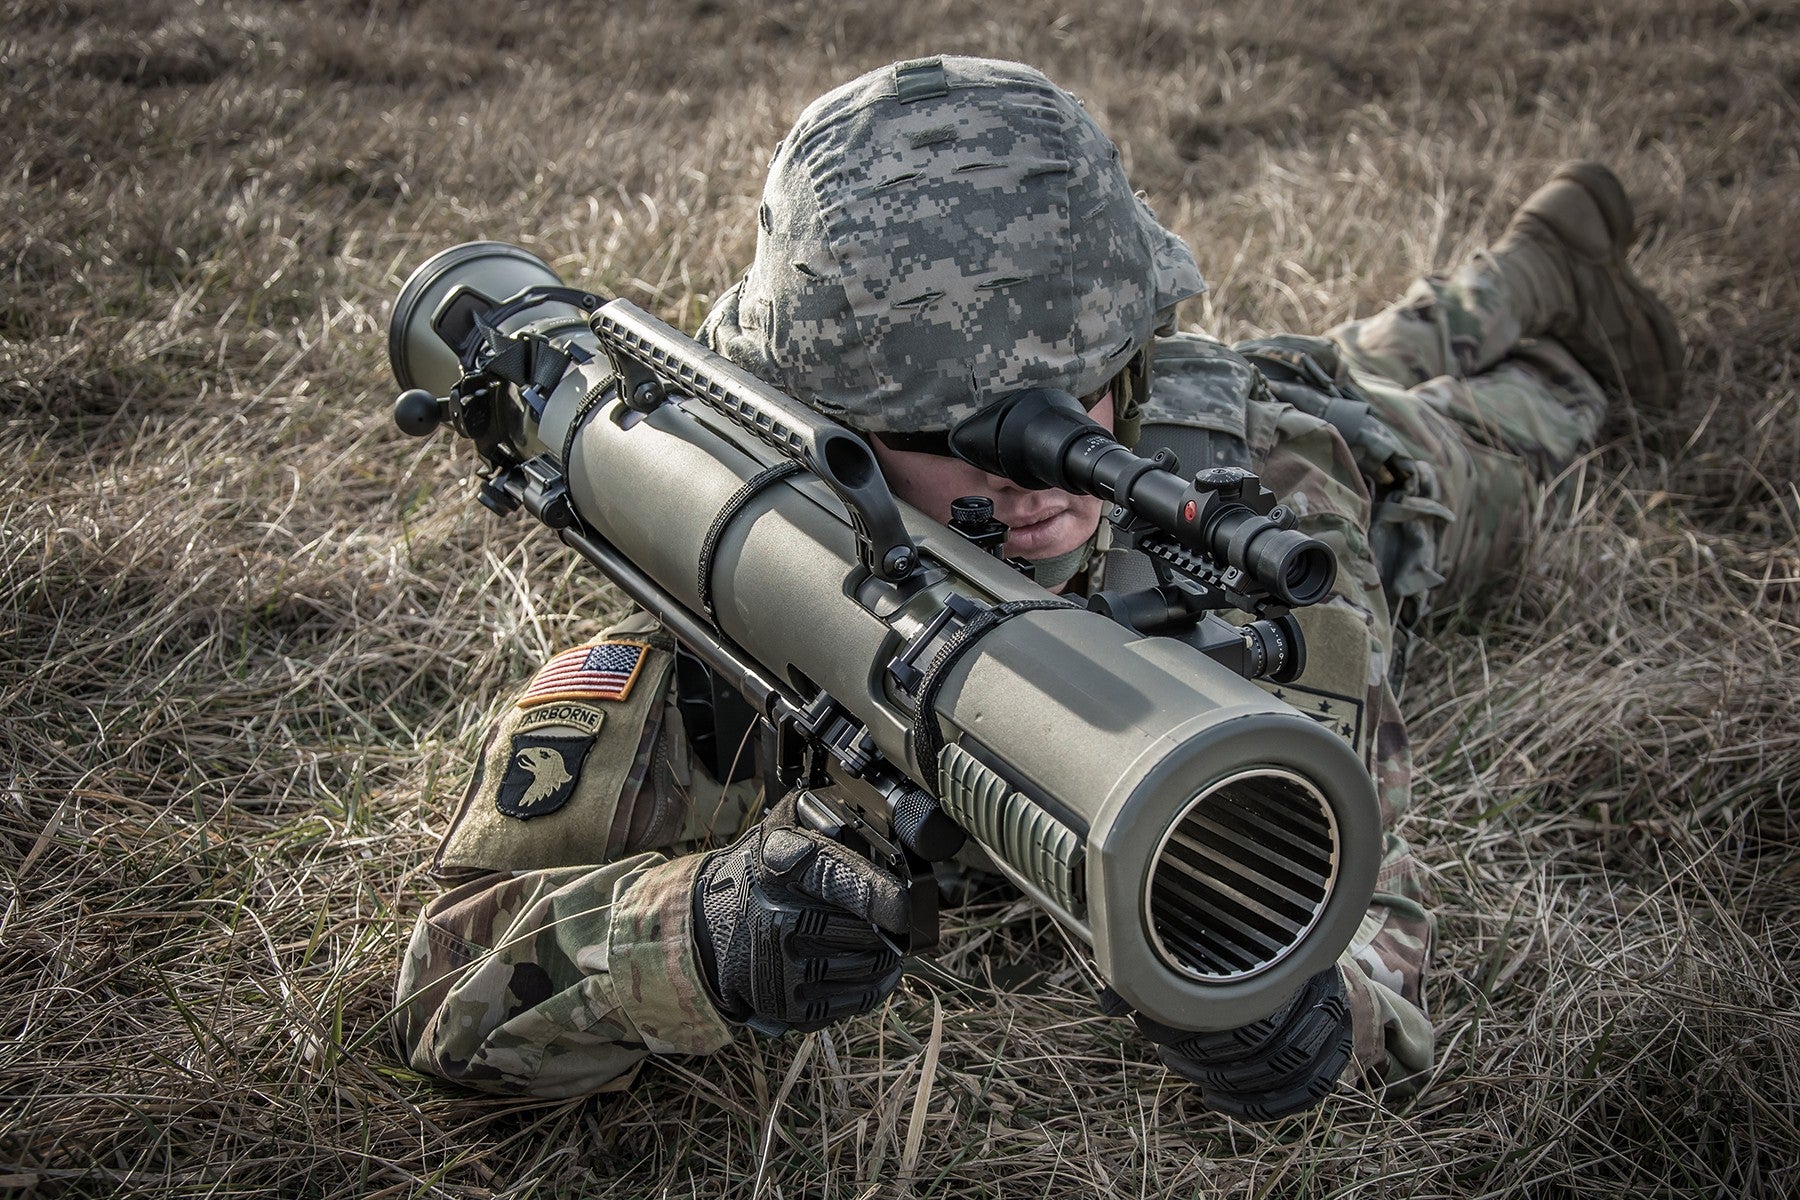 Soldiers are officially getting their hands on the most advanced Carl Gustaf recoilless rifle yet